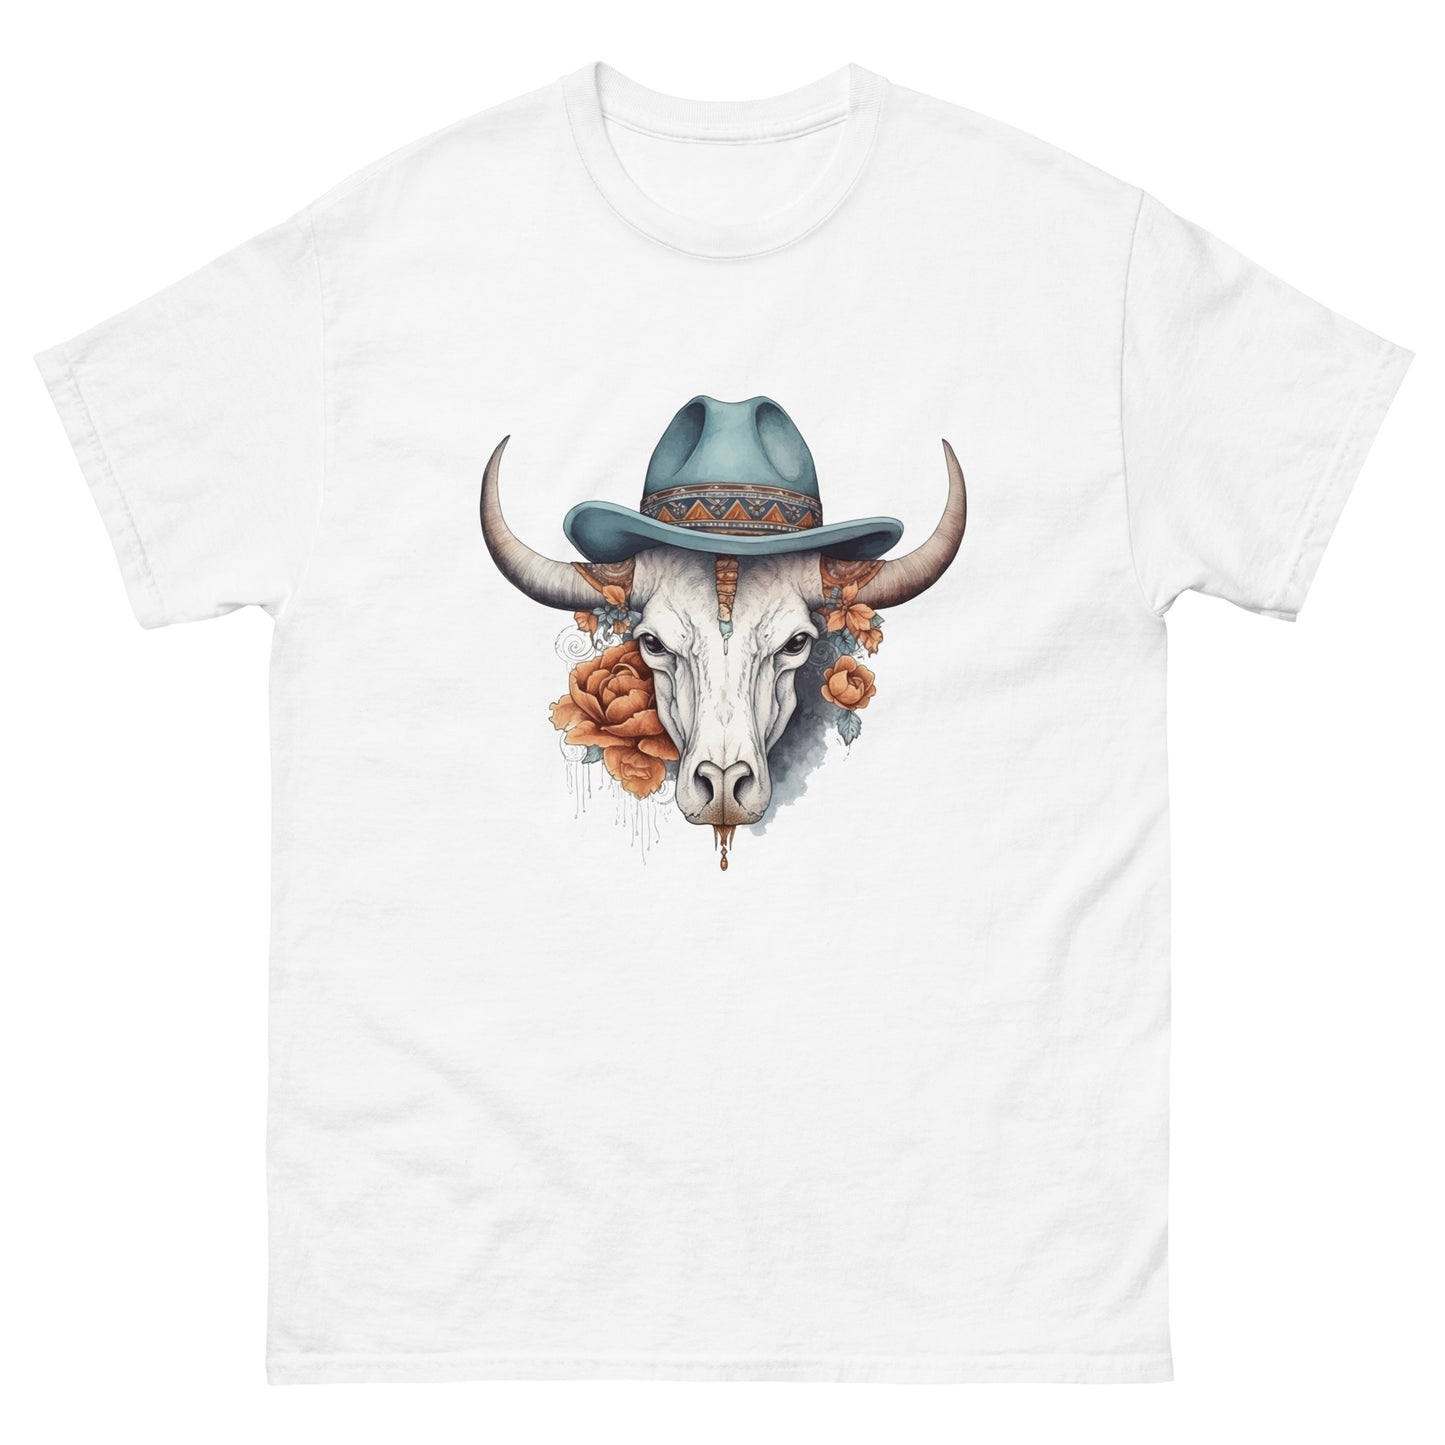 Bull in hat and flowers, T-shirt gifts for farmer, Portrait cow, Horned buffalo, Folk and country style - Men's classic tee